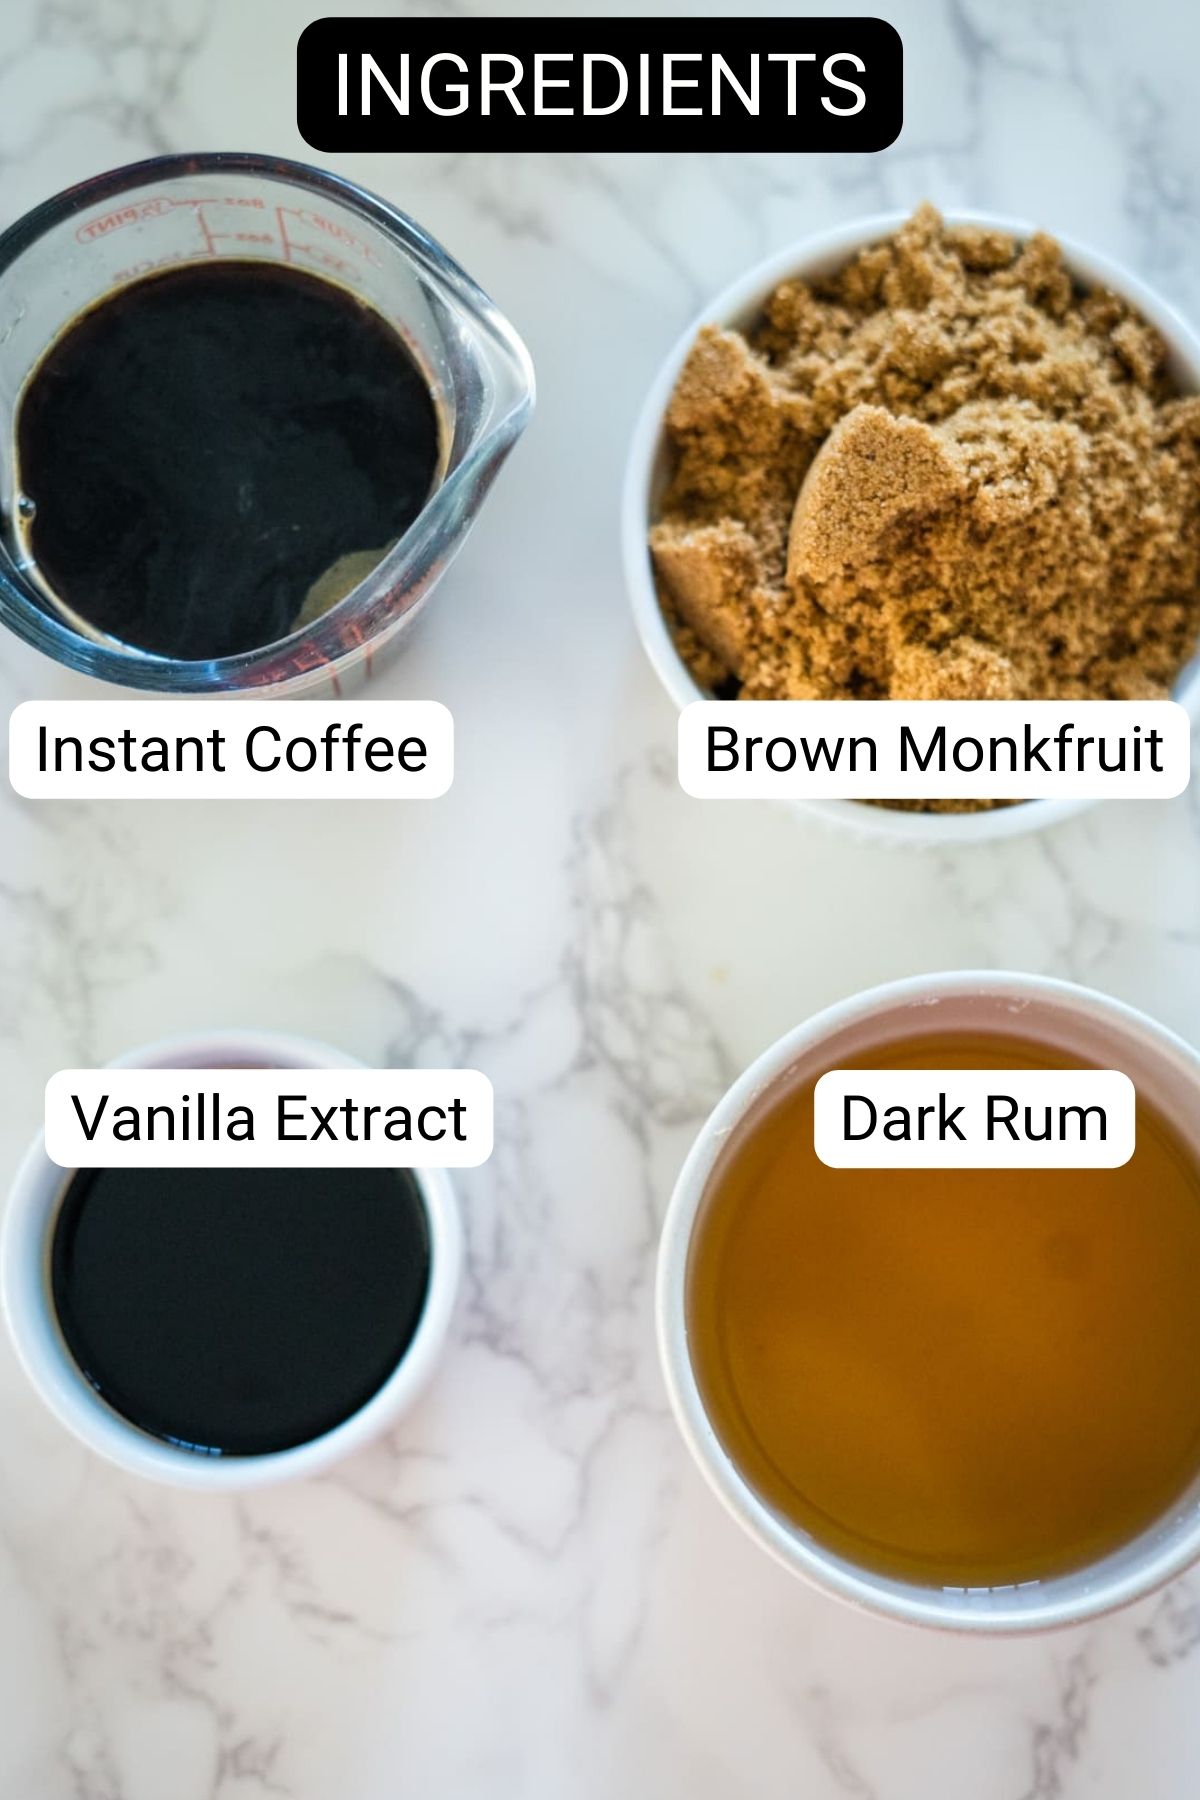 This description lists the ingredients for a keto coffee latte.